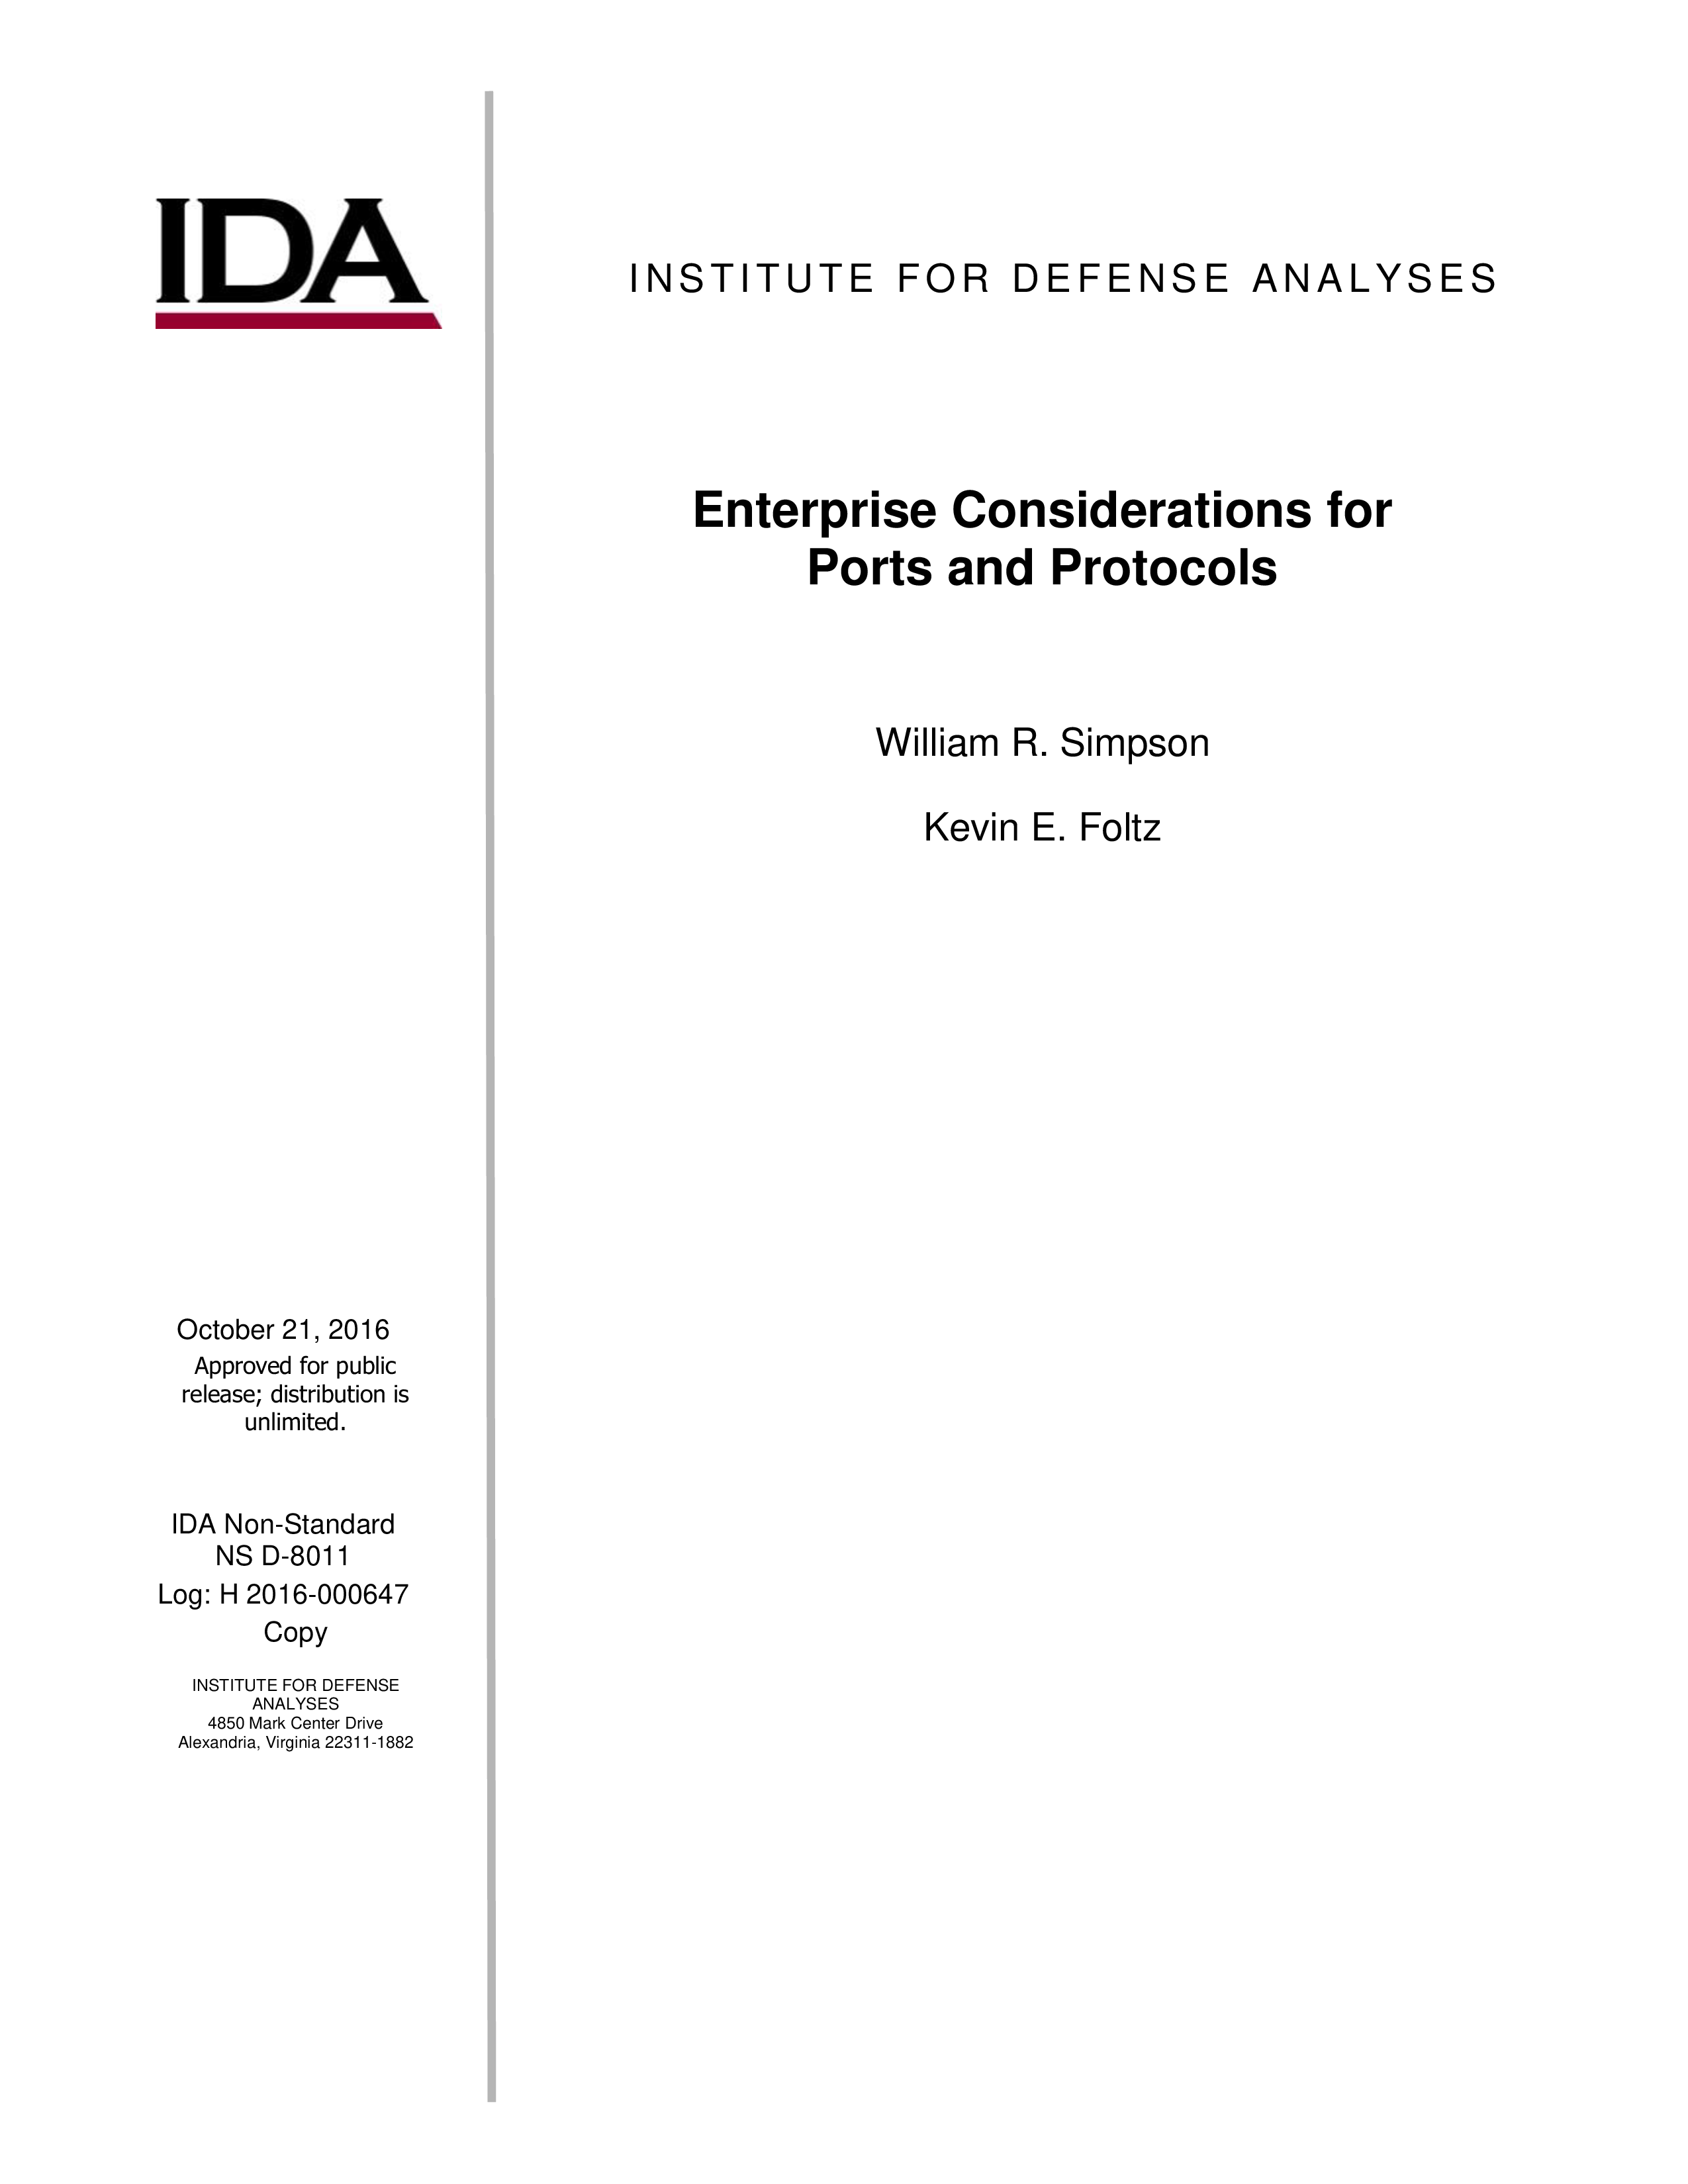 Enterprise Considerations for Ports and Protocols